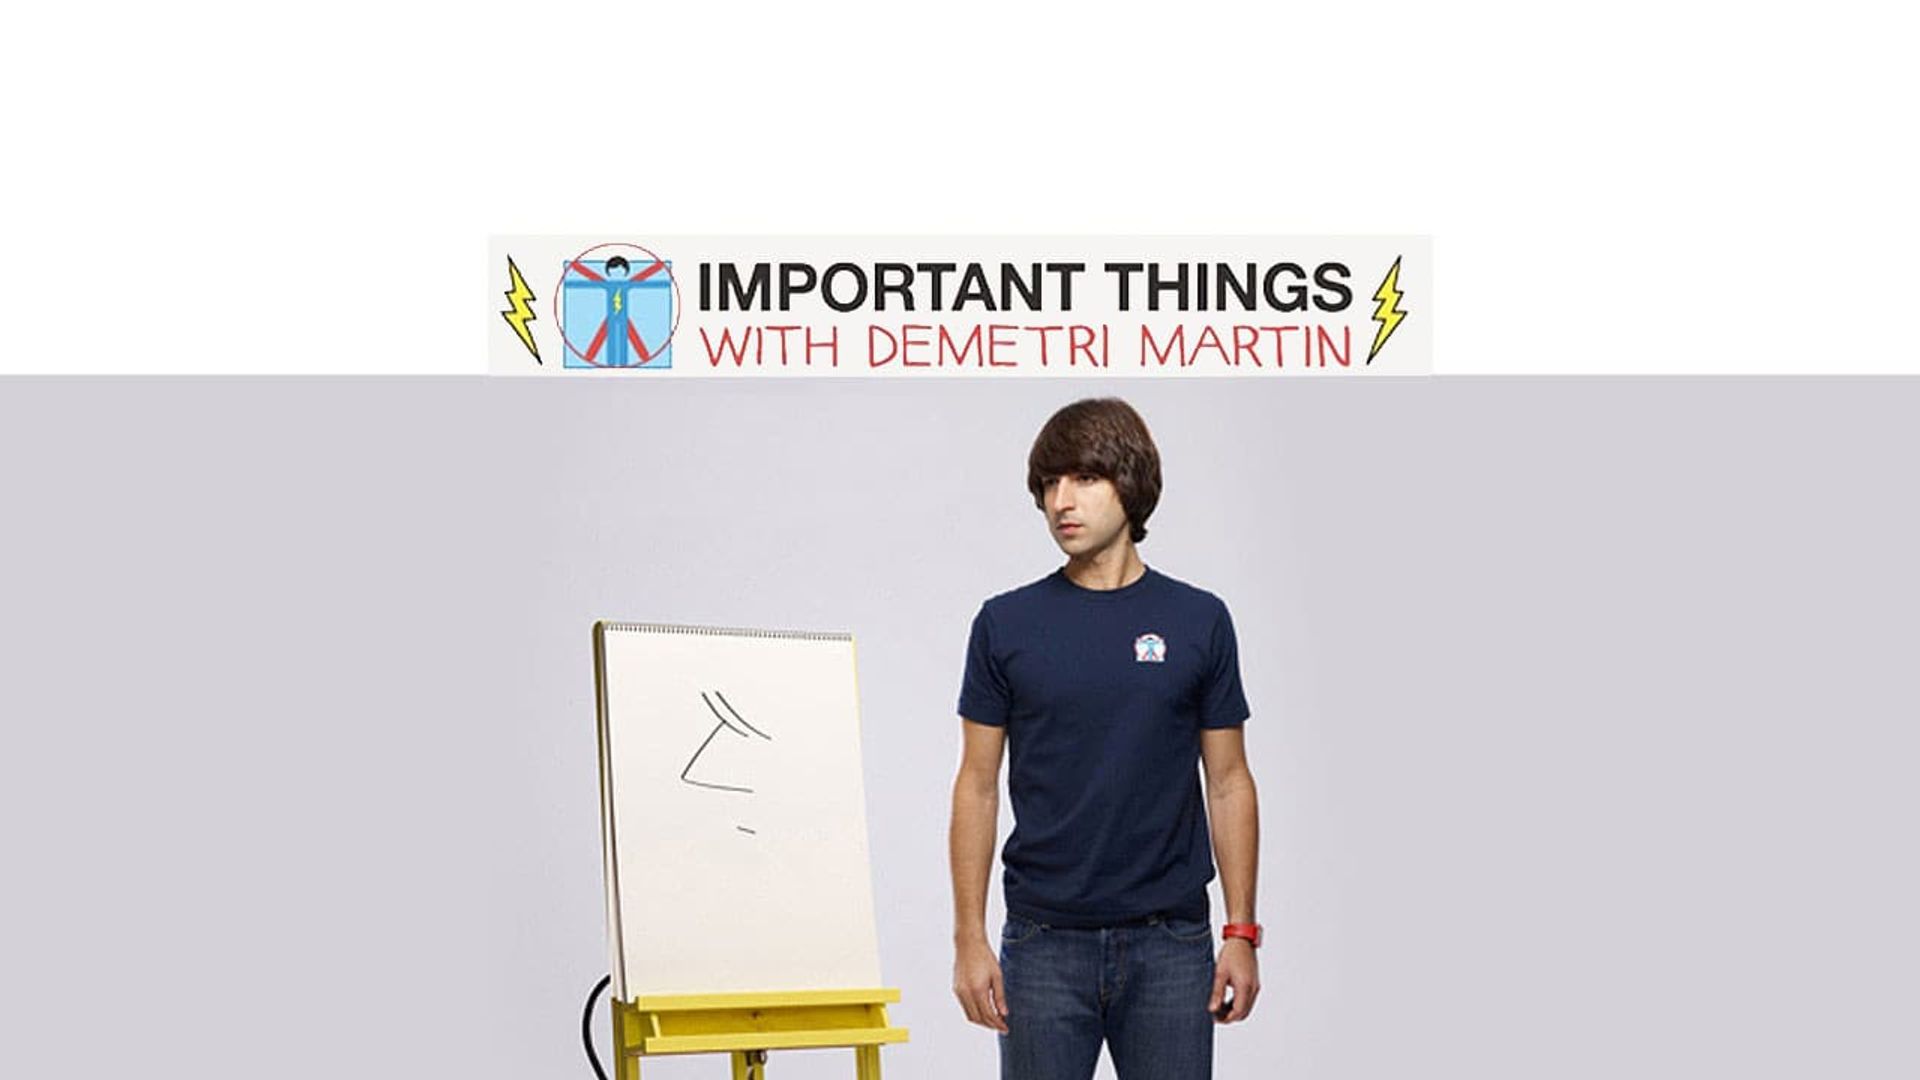 Important Things with Demetri Martin background